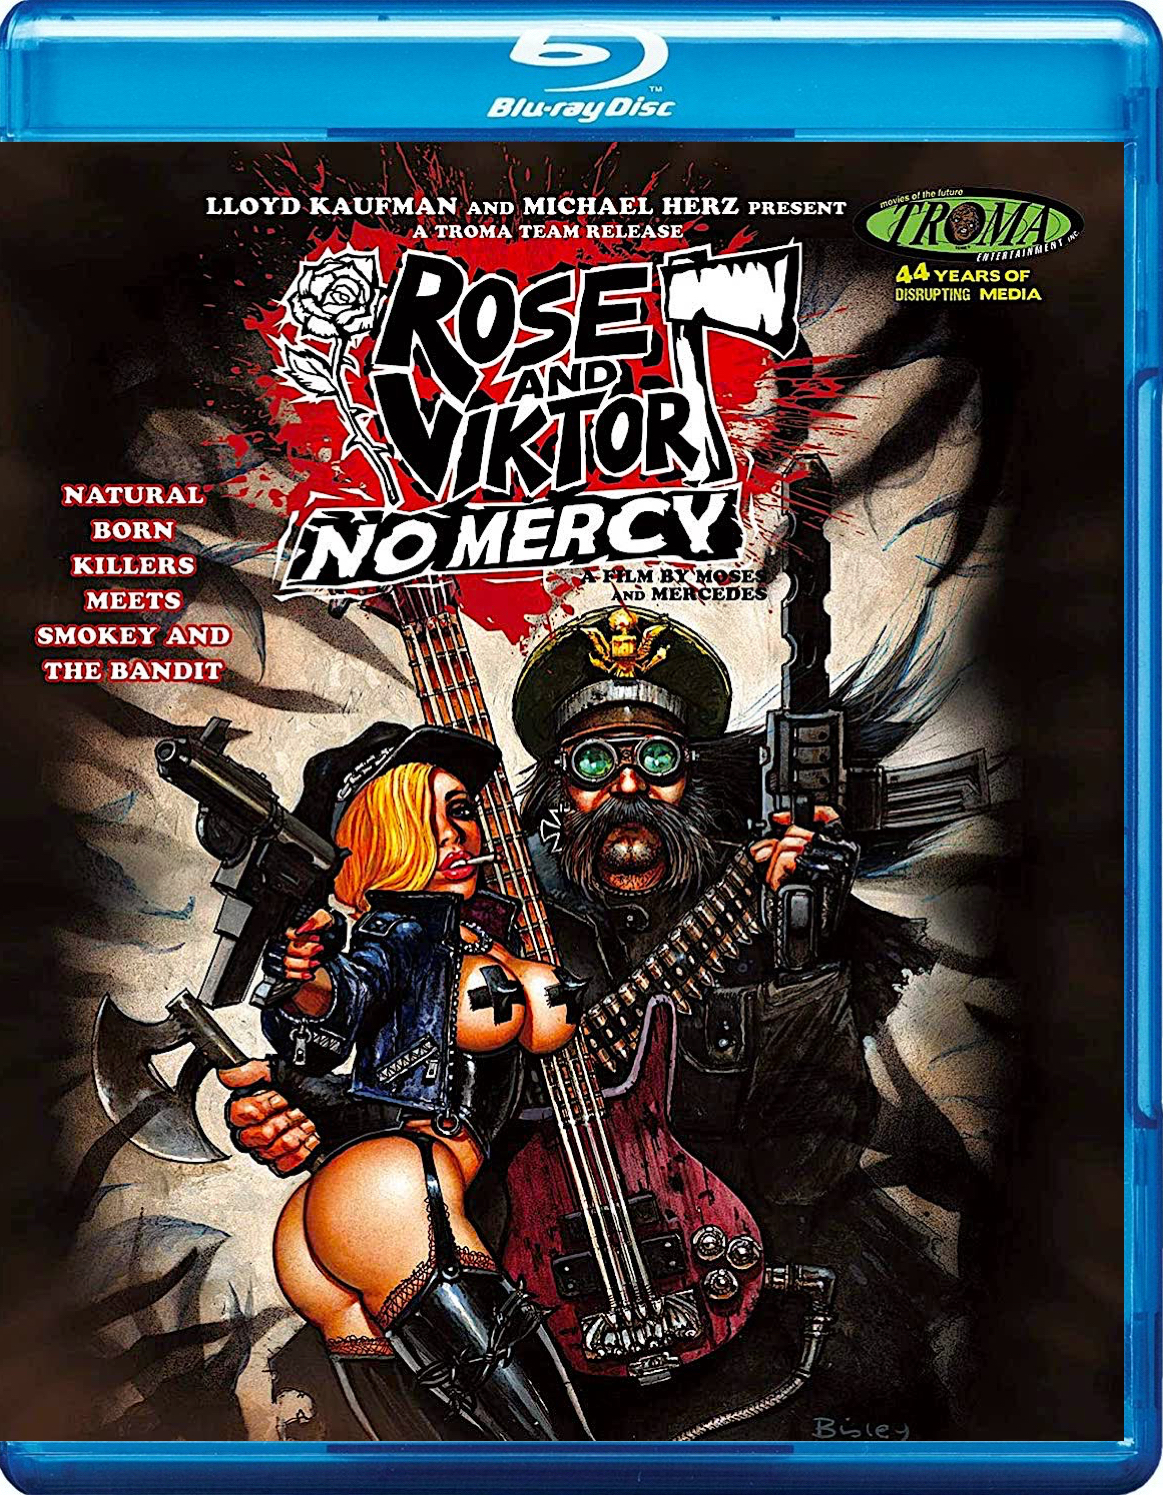 blu-ray and dvd covers: TROMA BLU-RAYS: THE TOXIC AVENGER BLU-RAY, THE ...